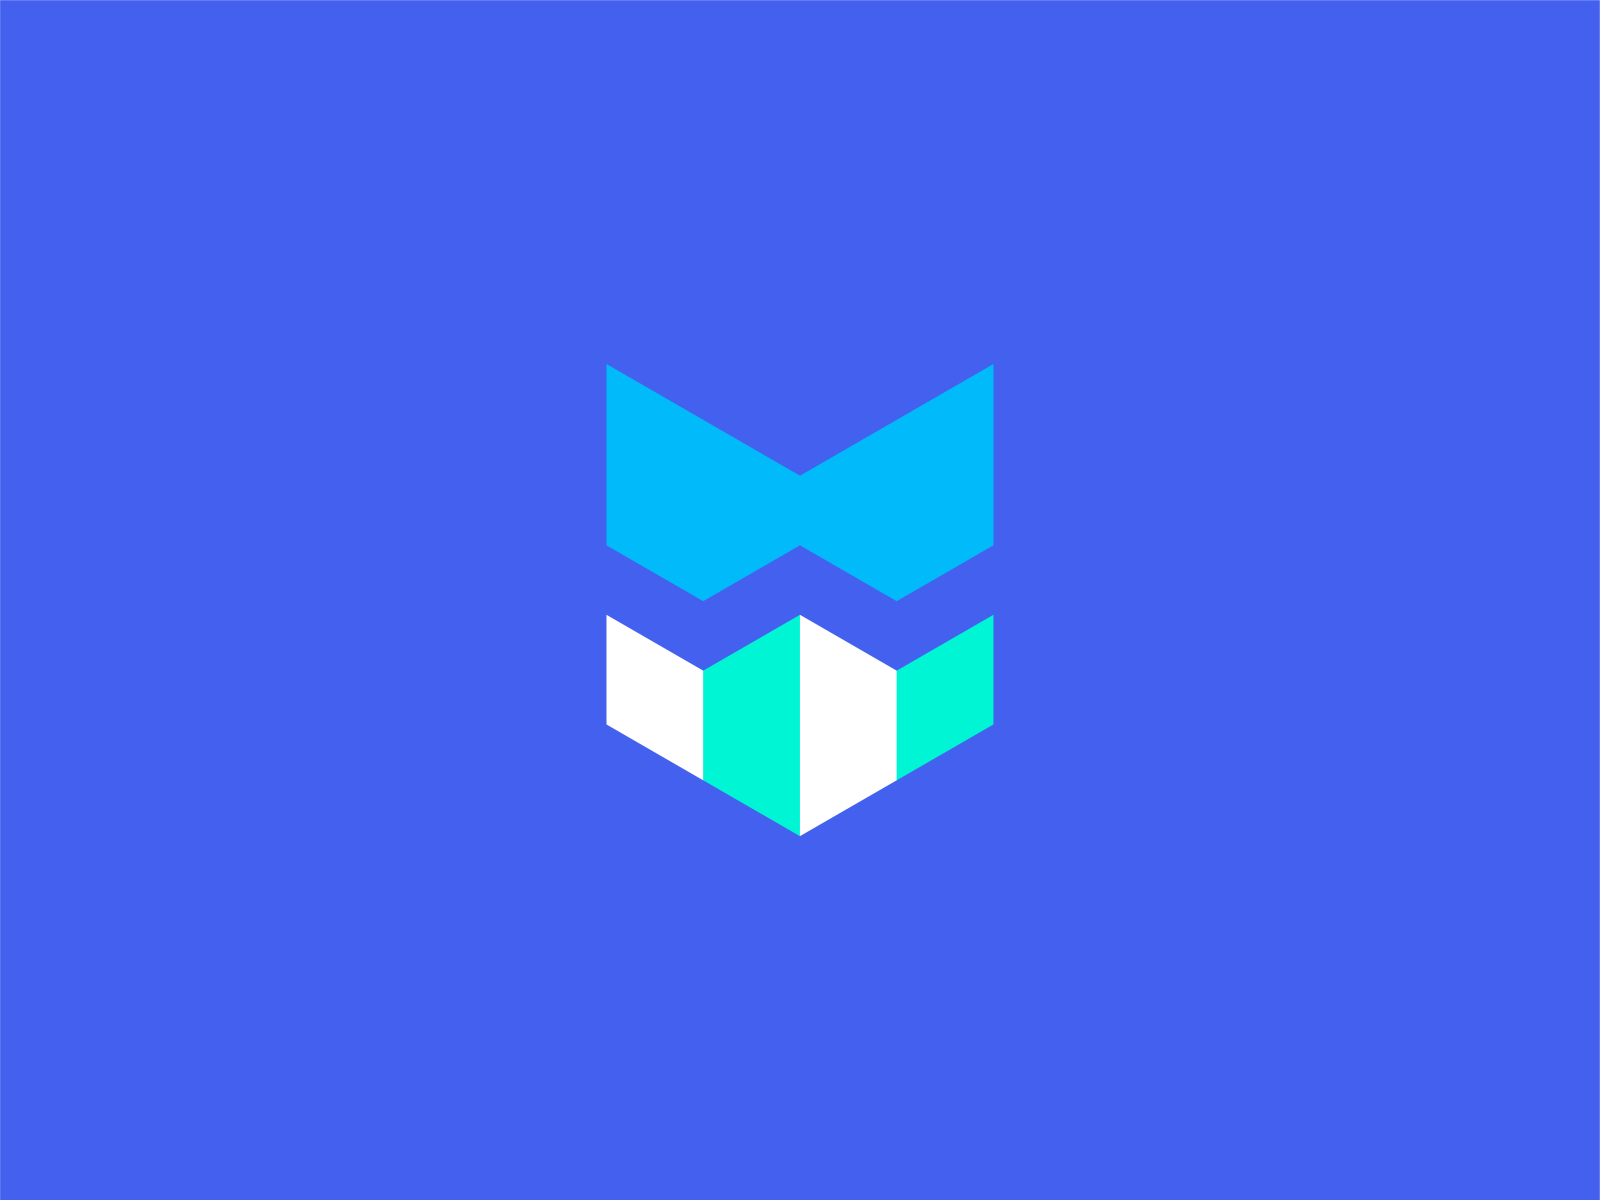 M+W Monogram by Sumon Yousuf on Dribbble